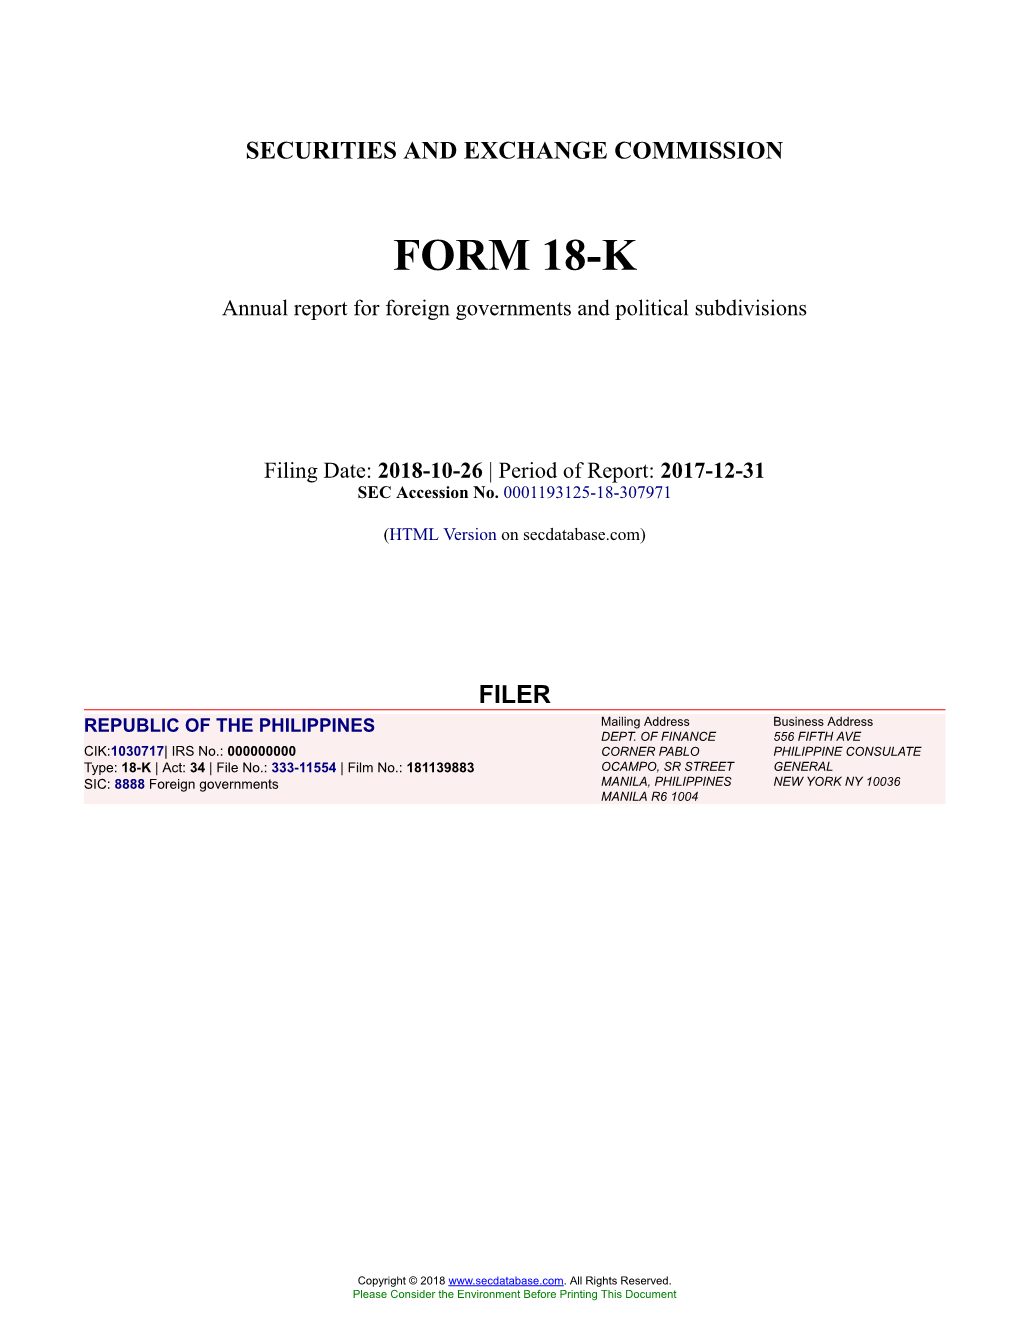 REPUBLIC of the PHILIPPINES Form 18-K Filed